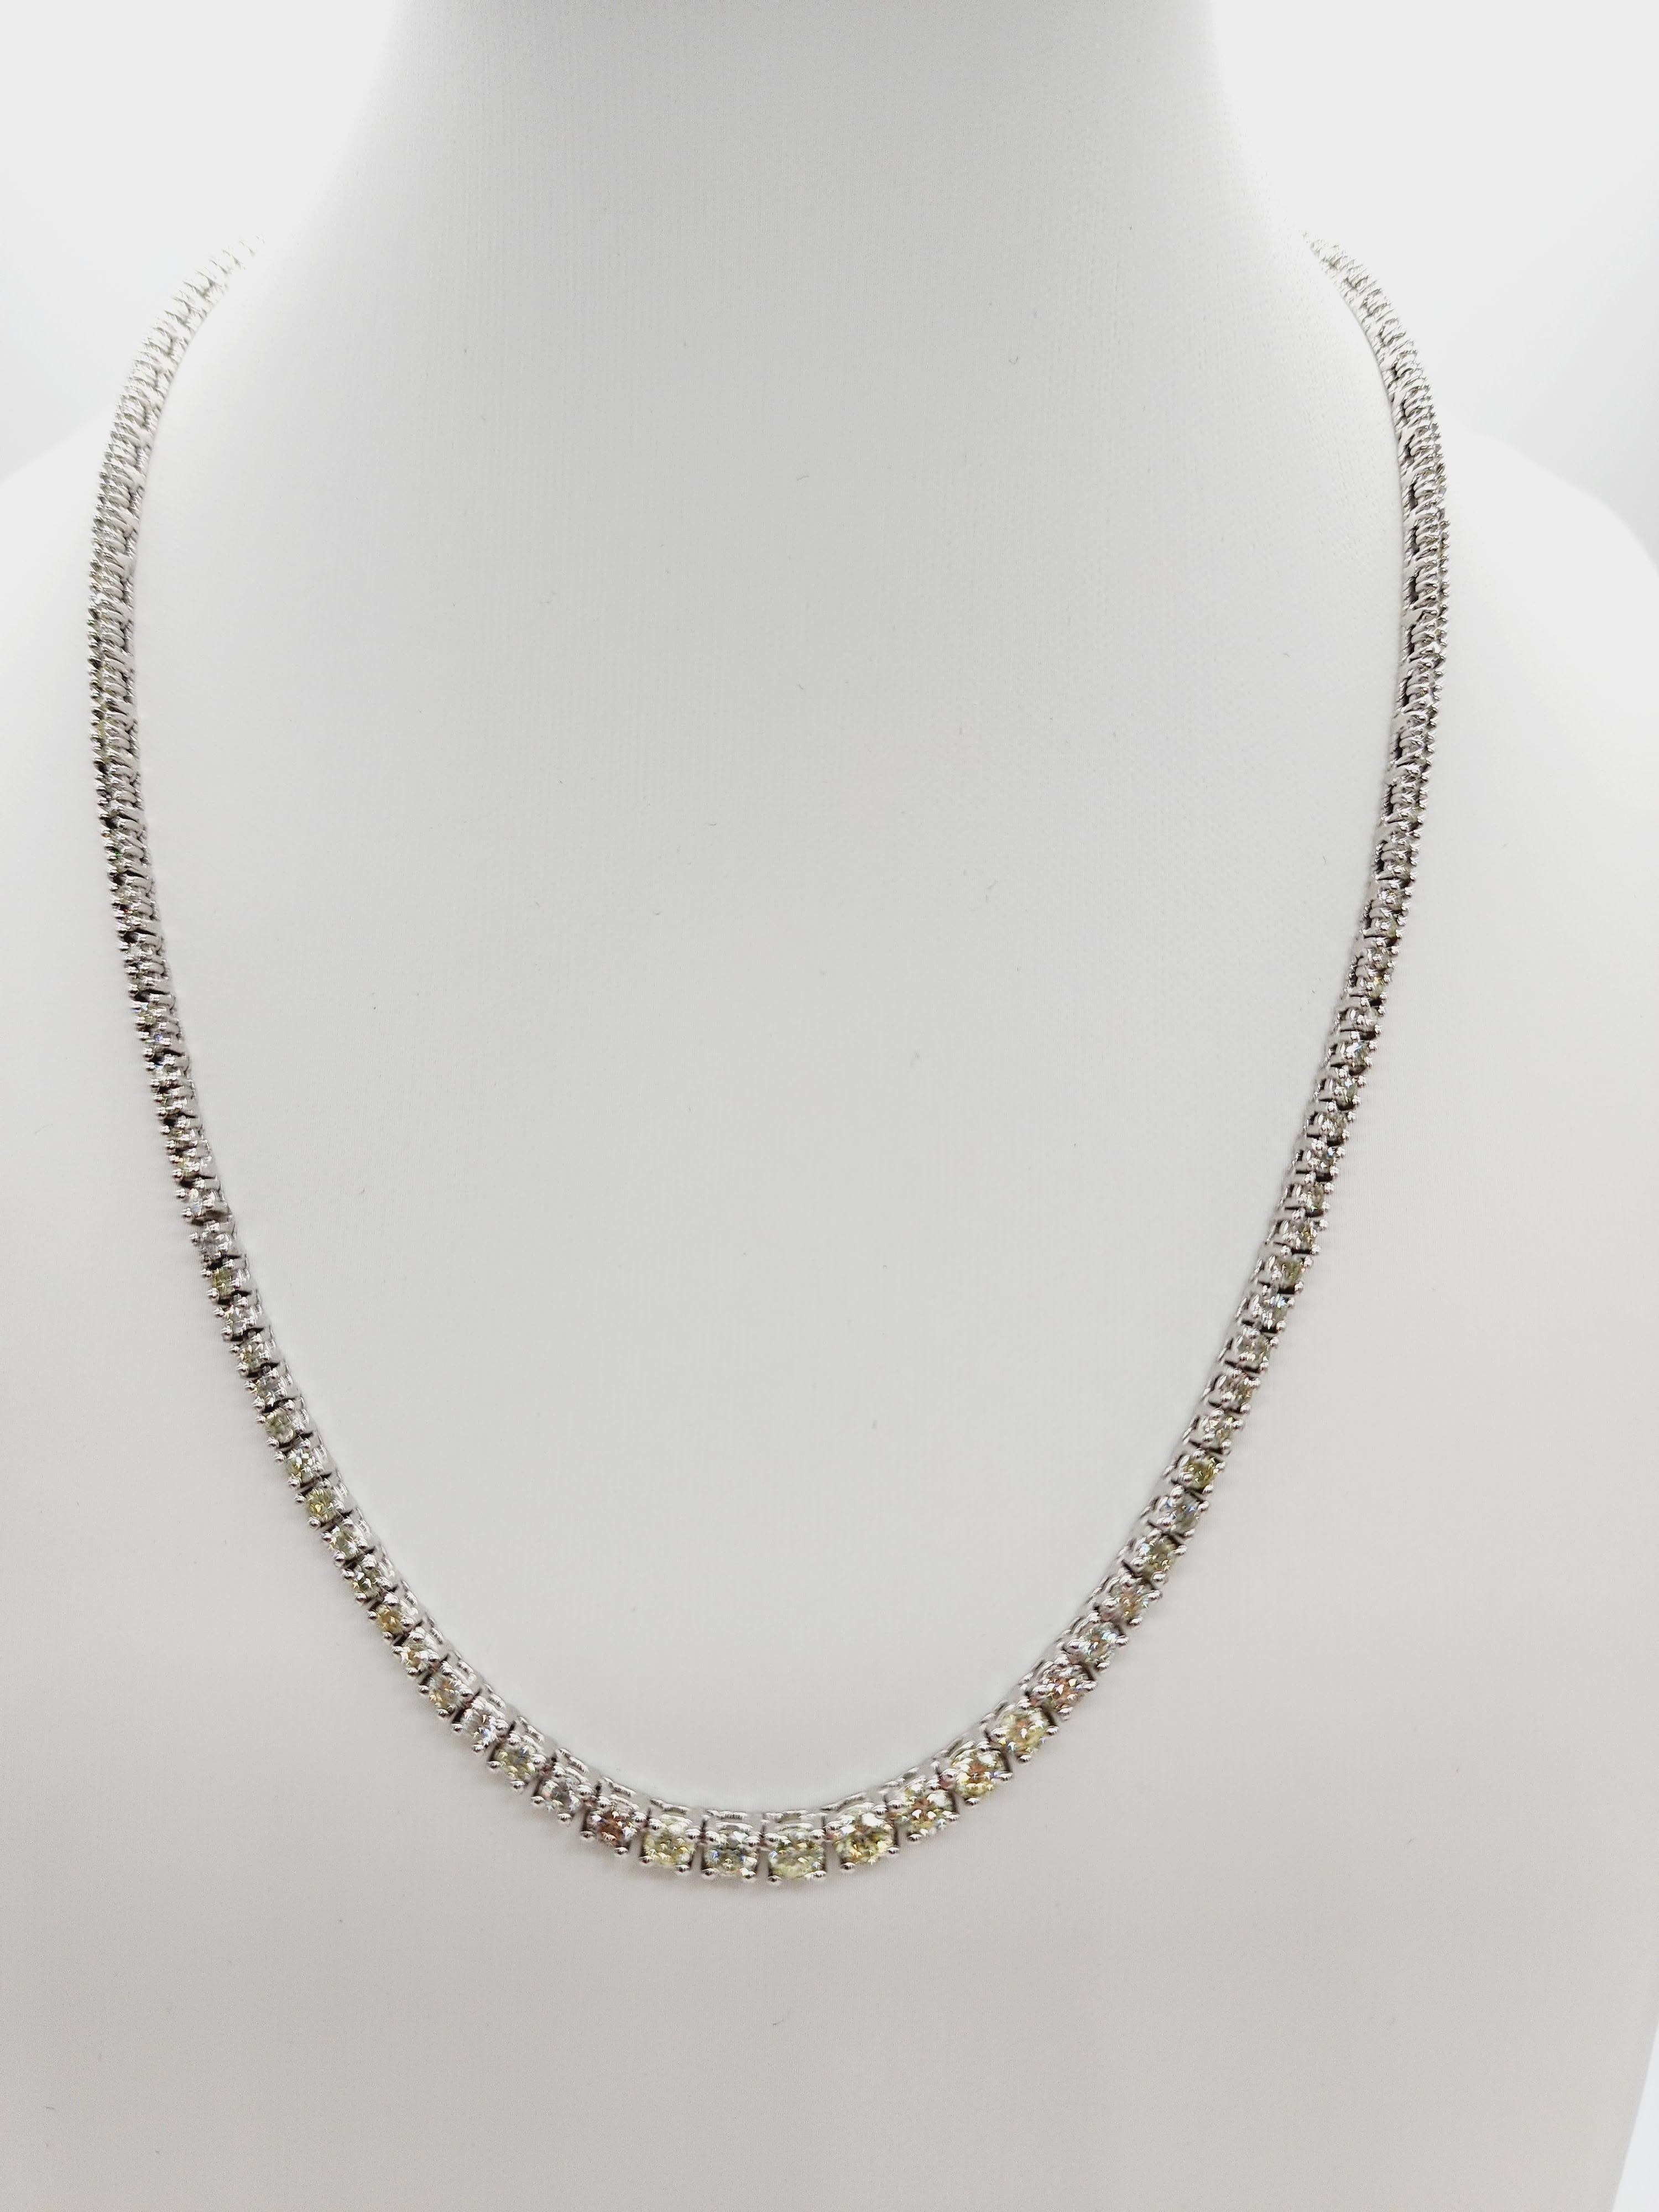 Brilliant and beautiful Riviera necklace, round-brilliant cut natural diamonds. 
14k white gold classic four-prong style for maximum light brilliance.
16 inch length. Average color J Color, I Clarity. 

*Free shipping within the U.S.*